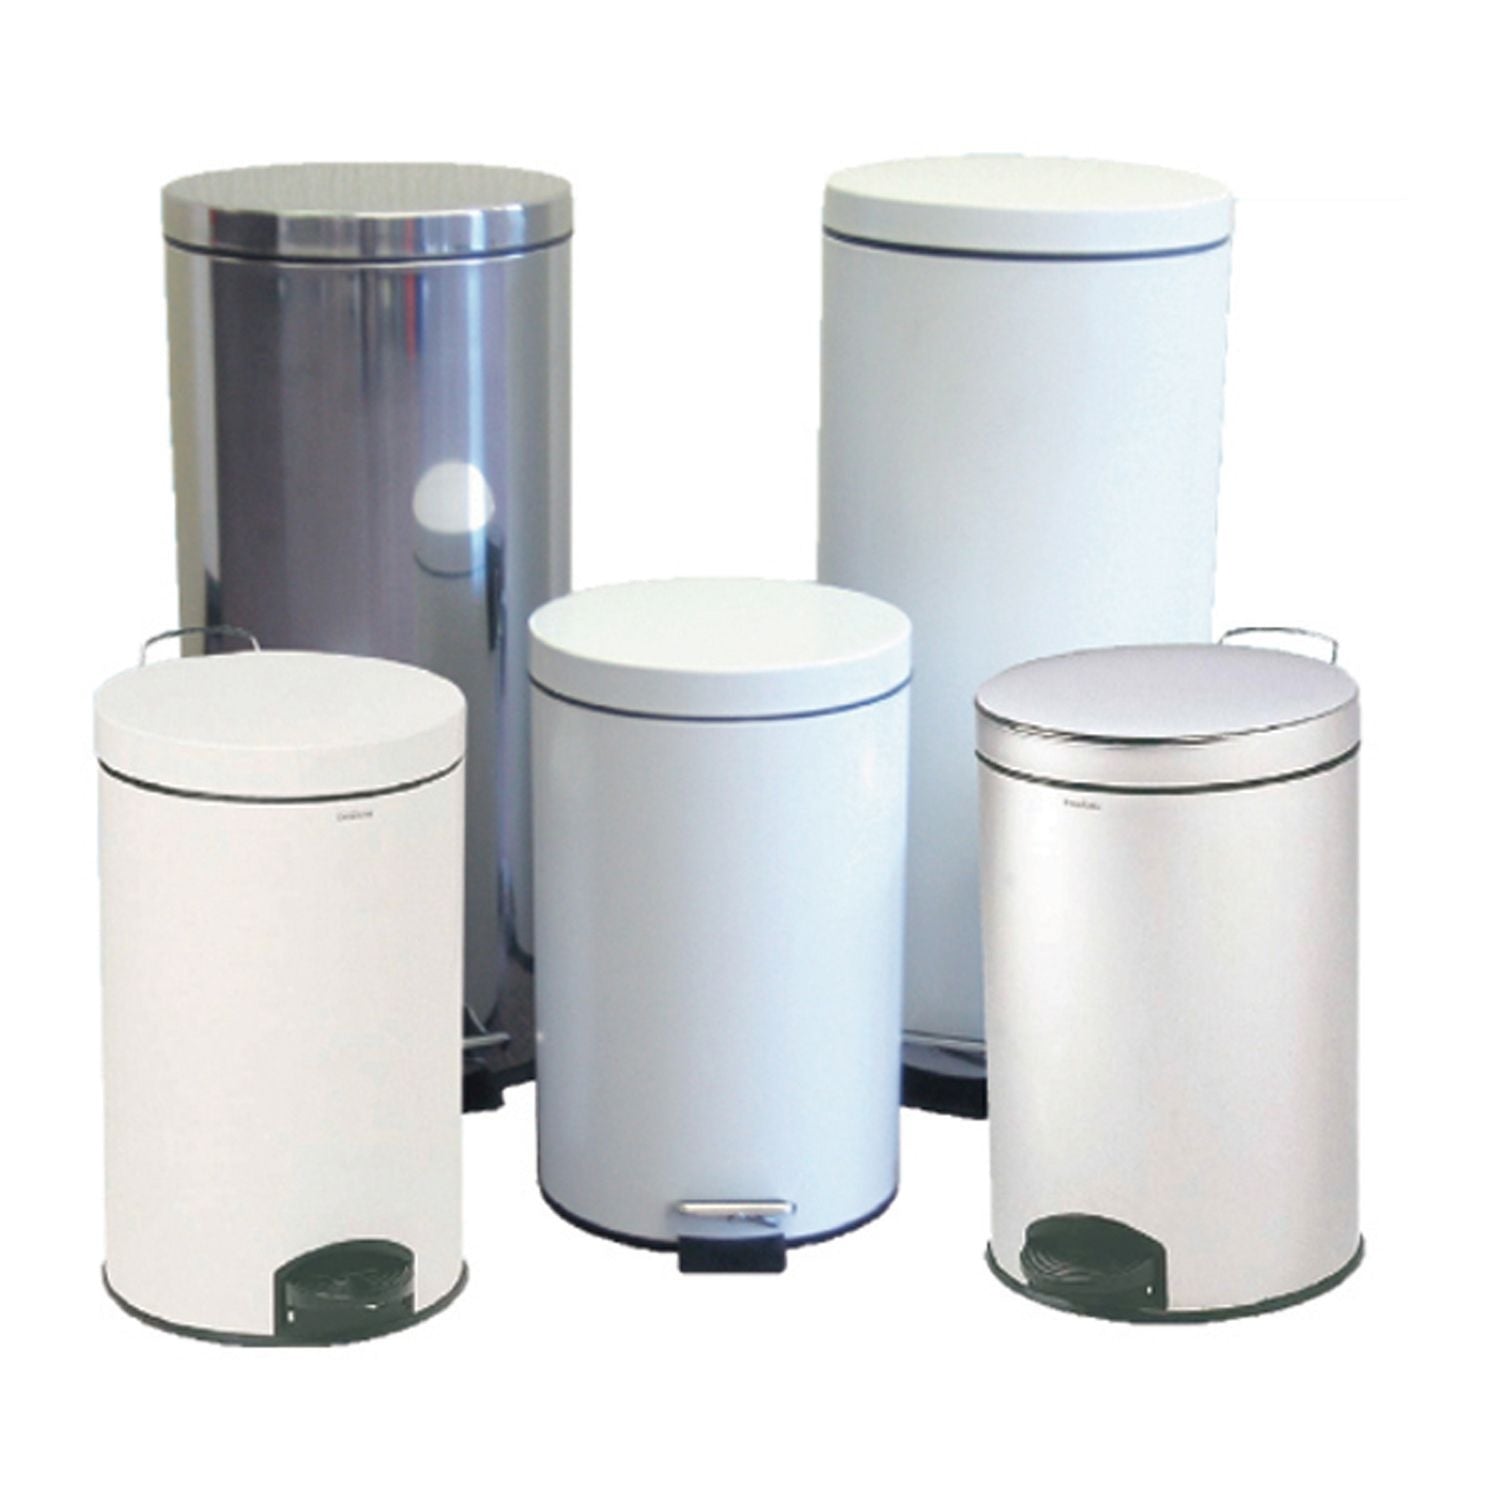 Pedal Bin | 30L | Stainless Steal | Plastic Liner